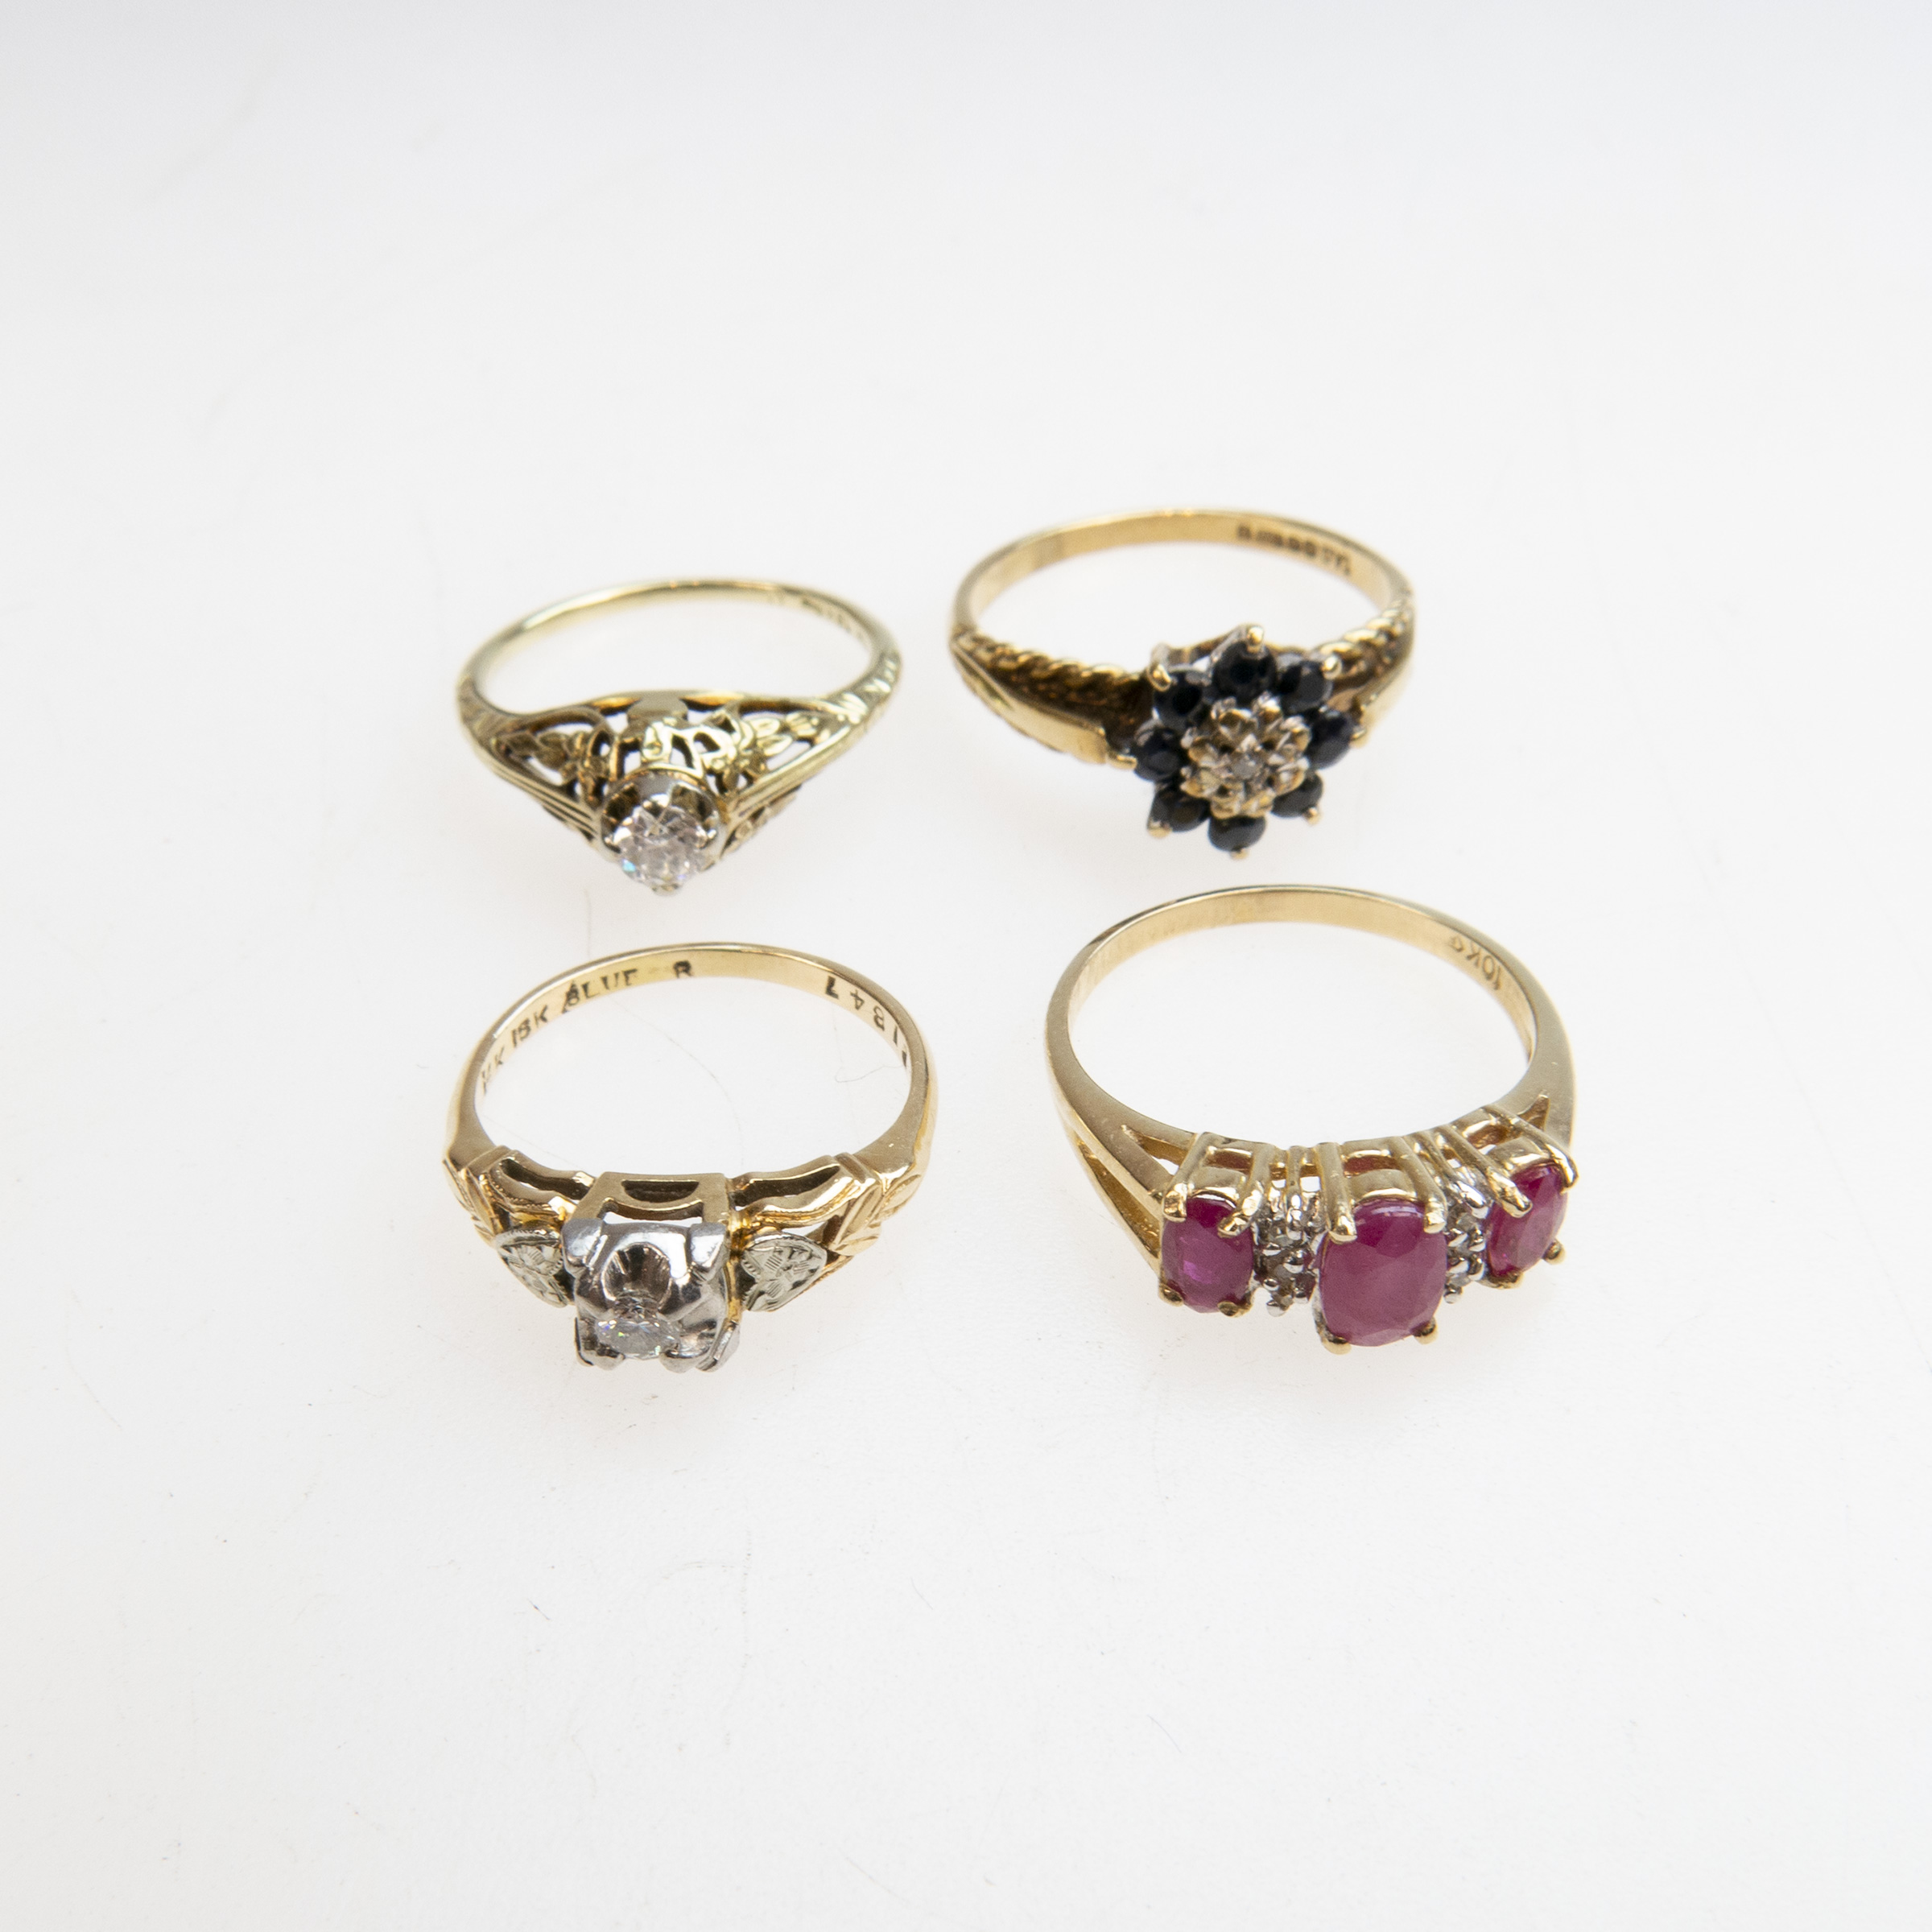 1 x 9k, 1 x 10k and 2 x 14k Yellow Gold Rings